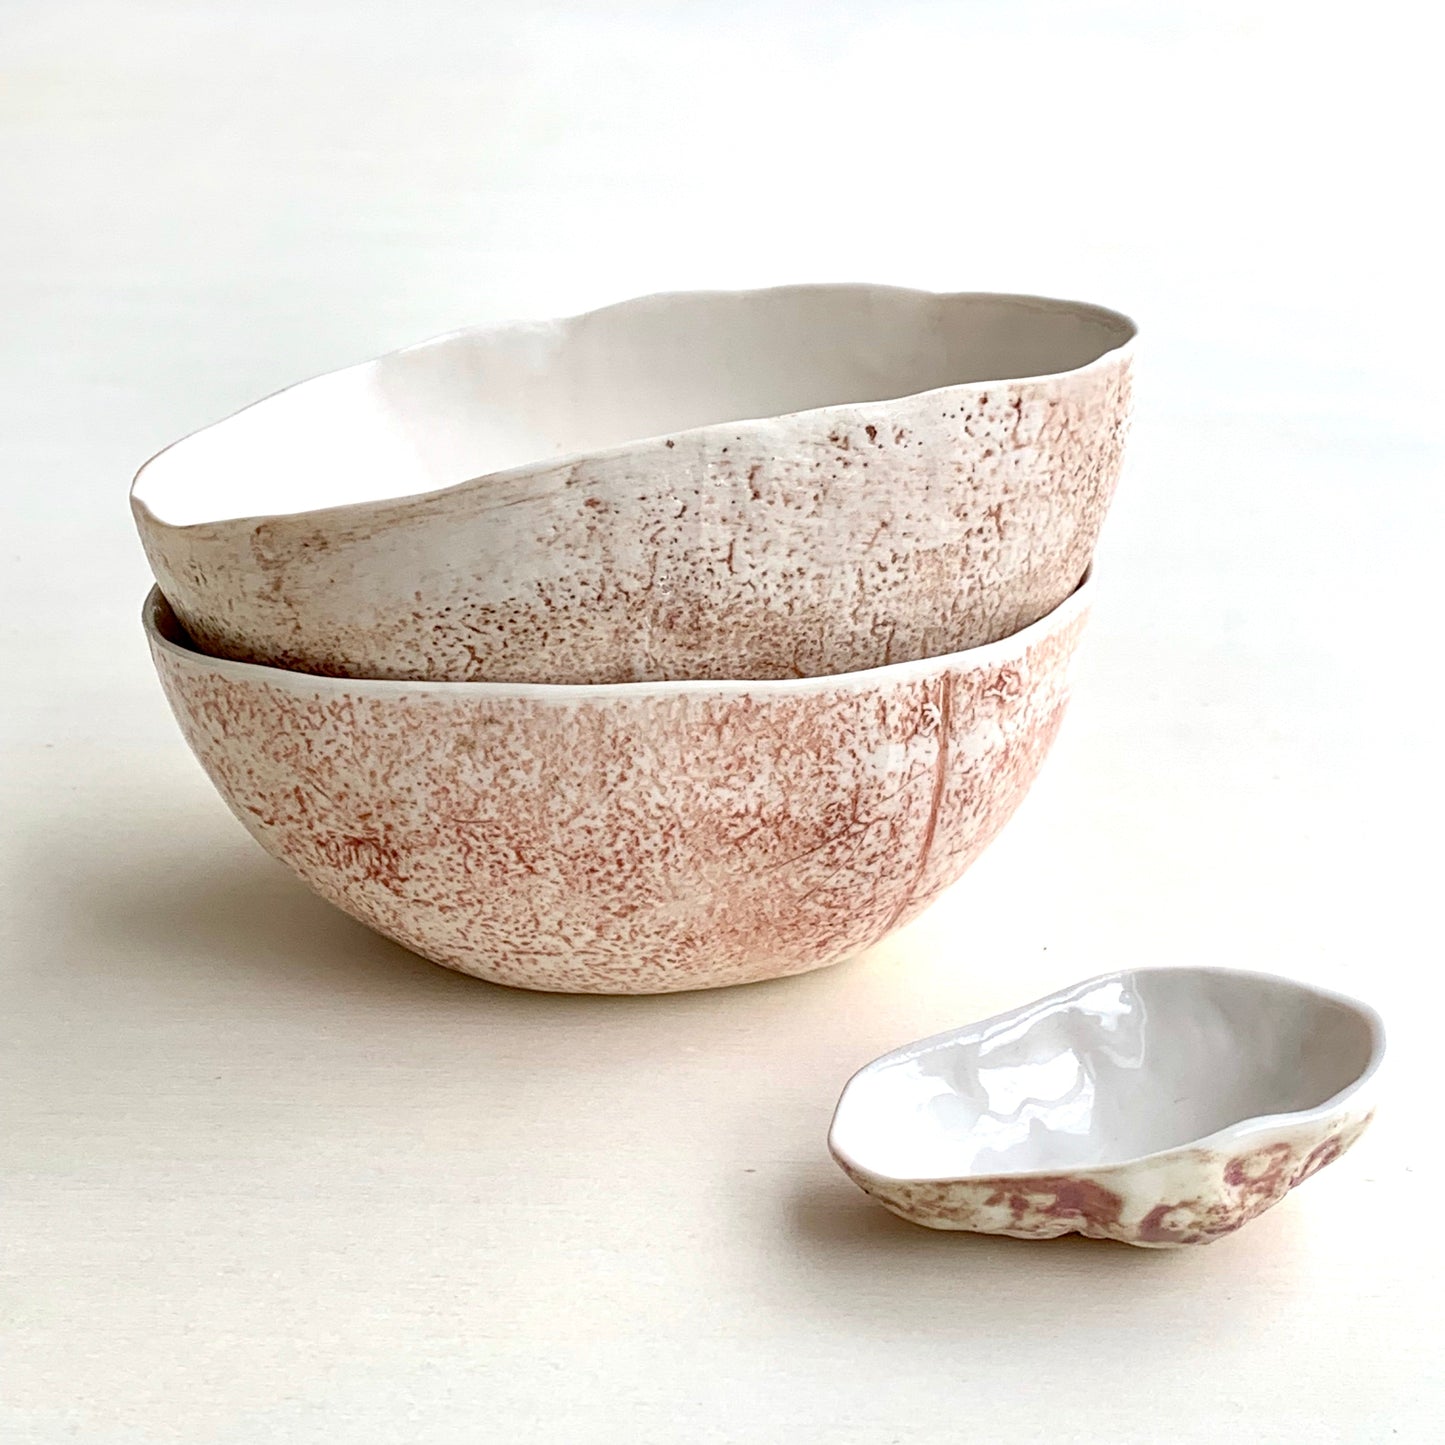 Unique handmade white porcelain ceramic bowl from the Amazon collection. This medium bowl made of porcelain enriches your table setting with an elegant organic feel or will surprise someone as a personal ceramic gift. A one of a kind signature piece of tableware with a unique design and earth pigment